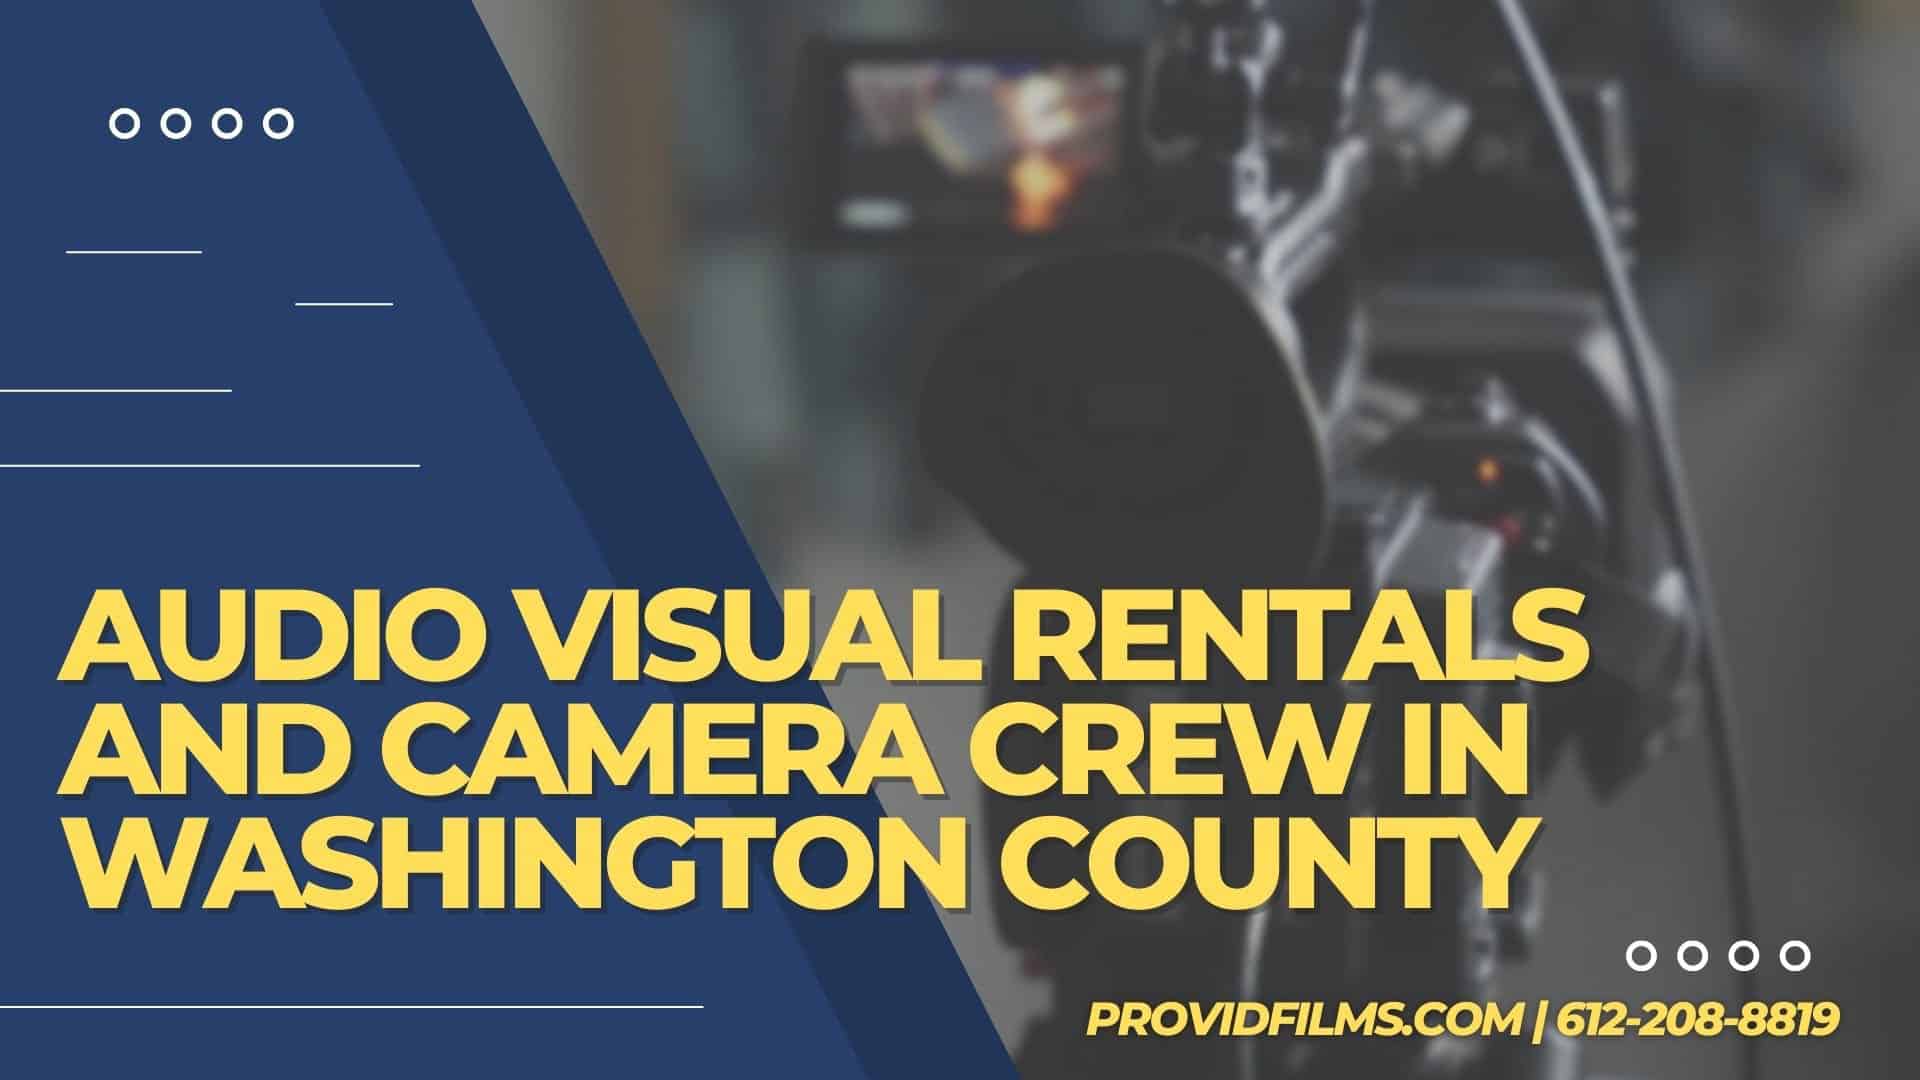 Graphic with a video camera crew with the text saying "AV Rental and Camera Crew in Washington County MN"